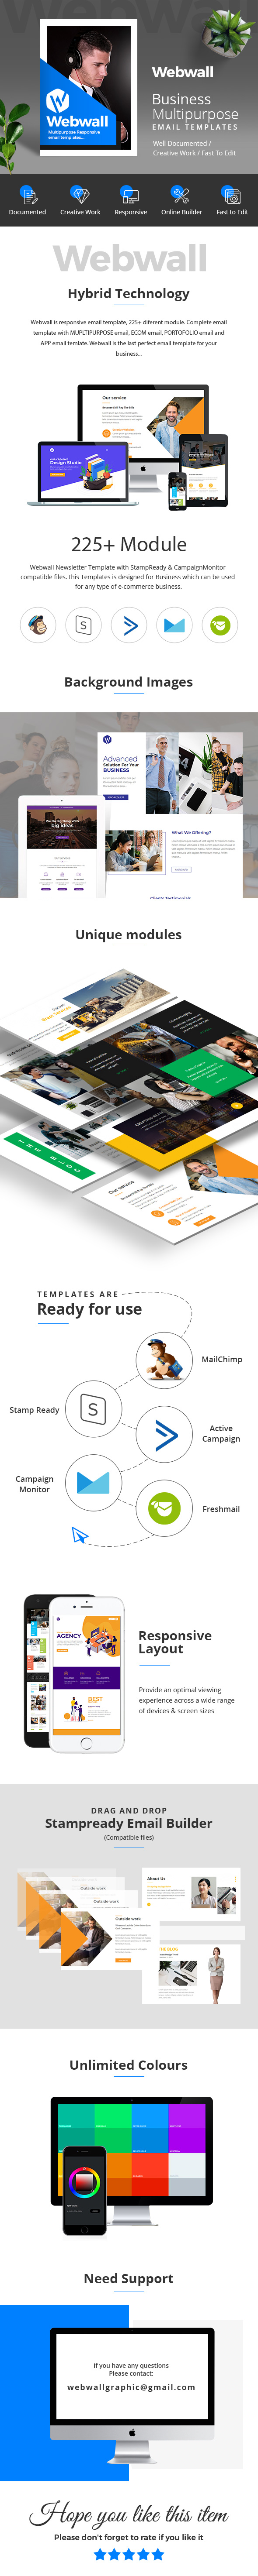 Webwall - Business Responsive Email Template + StampReady & CampaignMonitor compatible files - 1